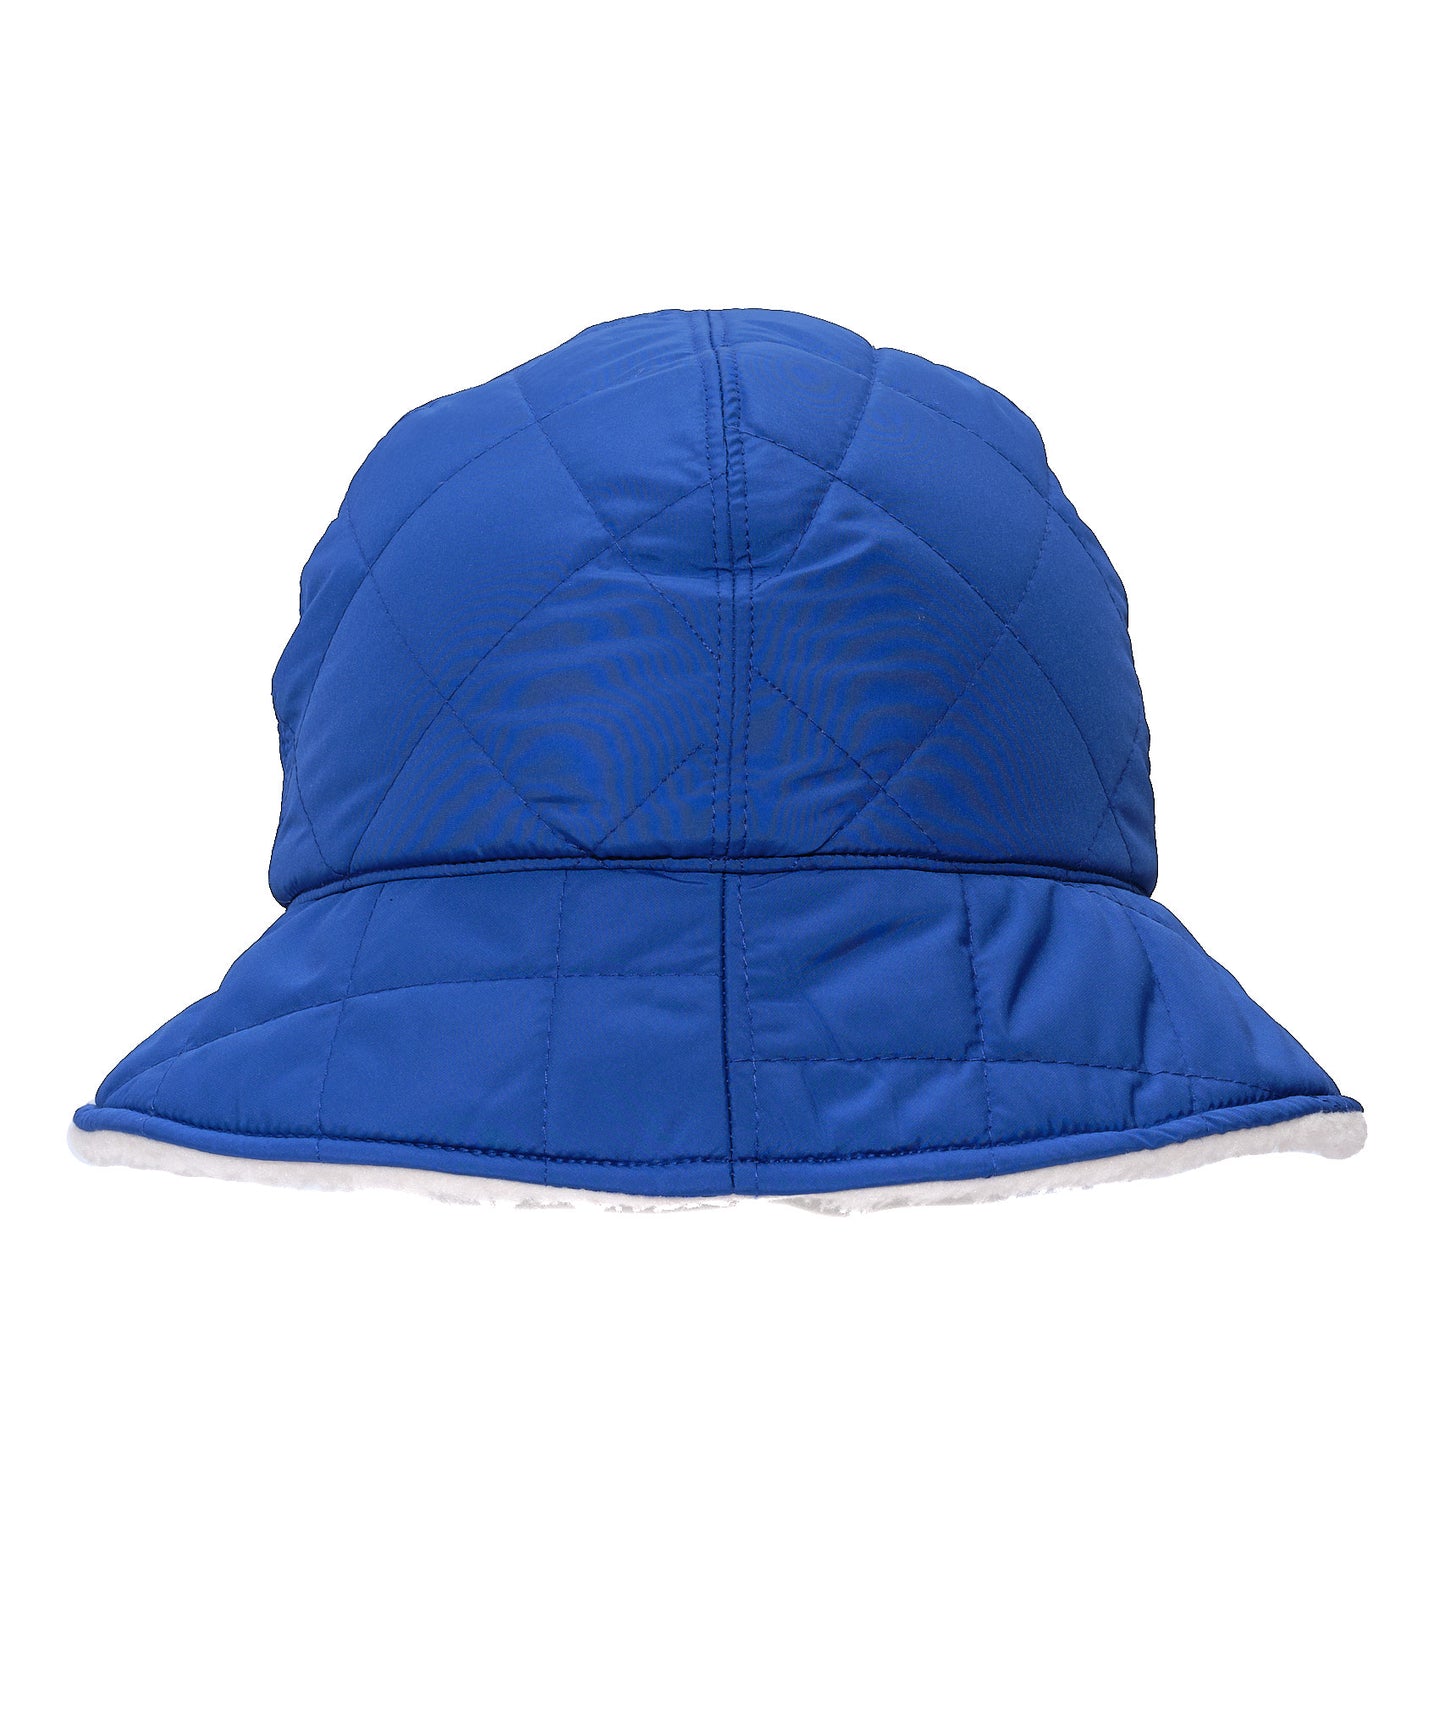 Reversible Quilted Hat in color Sodalite